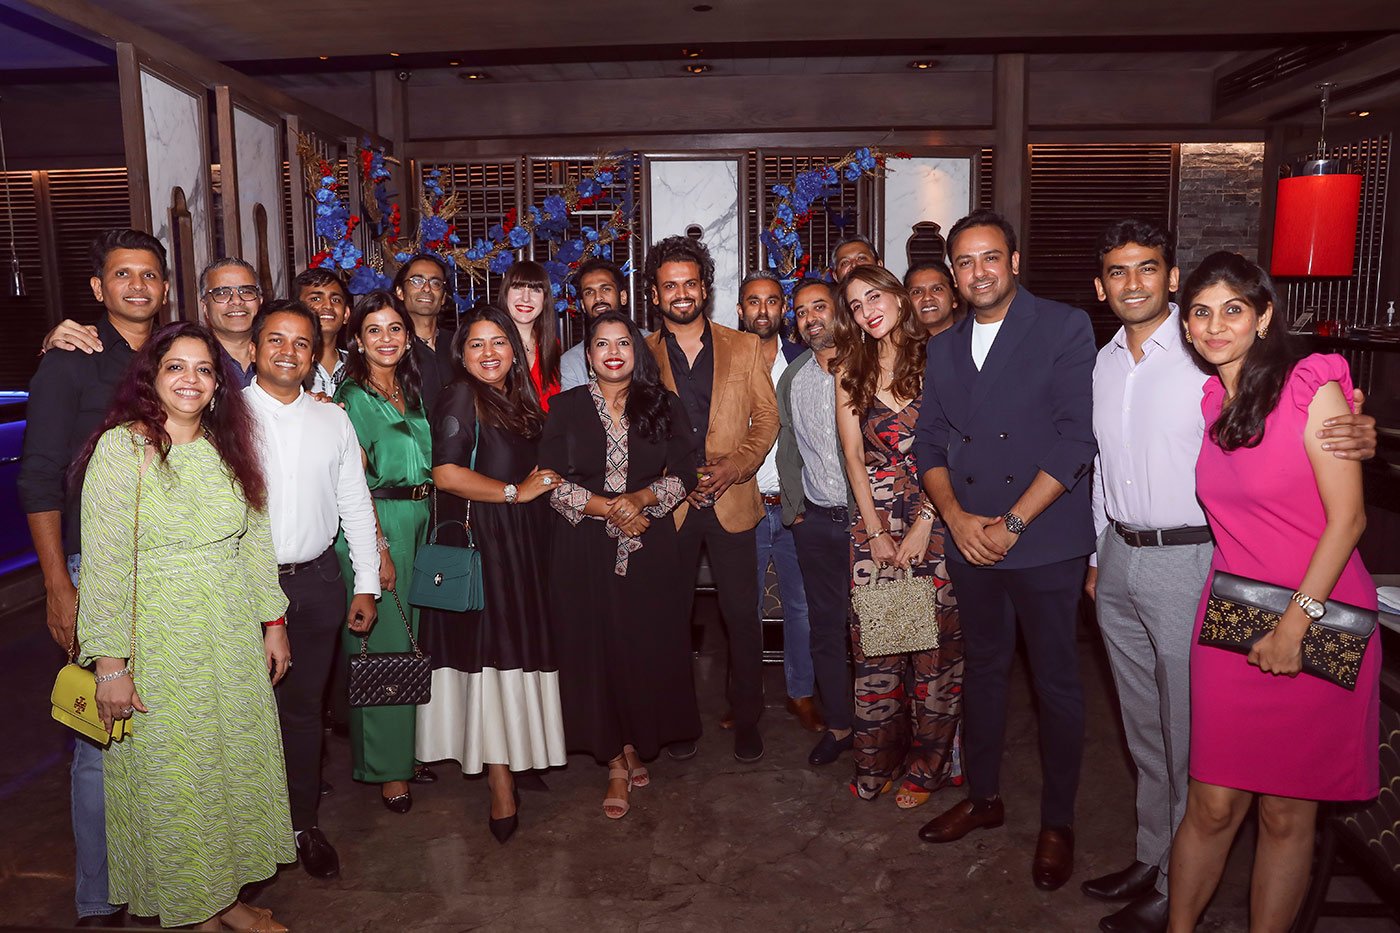 Jewellers, gem dealers and journalists from Mumbai, Jaipur and Delhi came to celebrate the 10th anniversary of KaterinaPerez.com